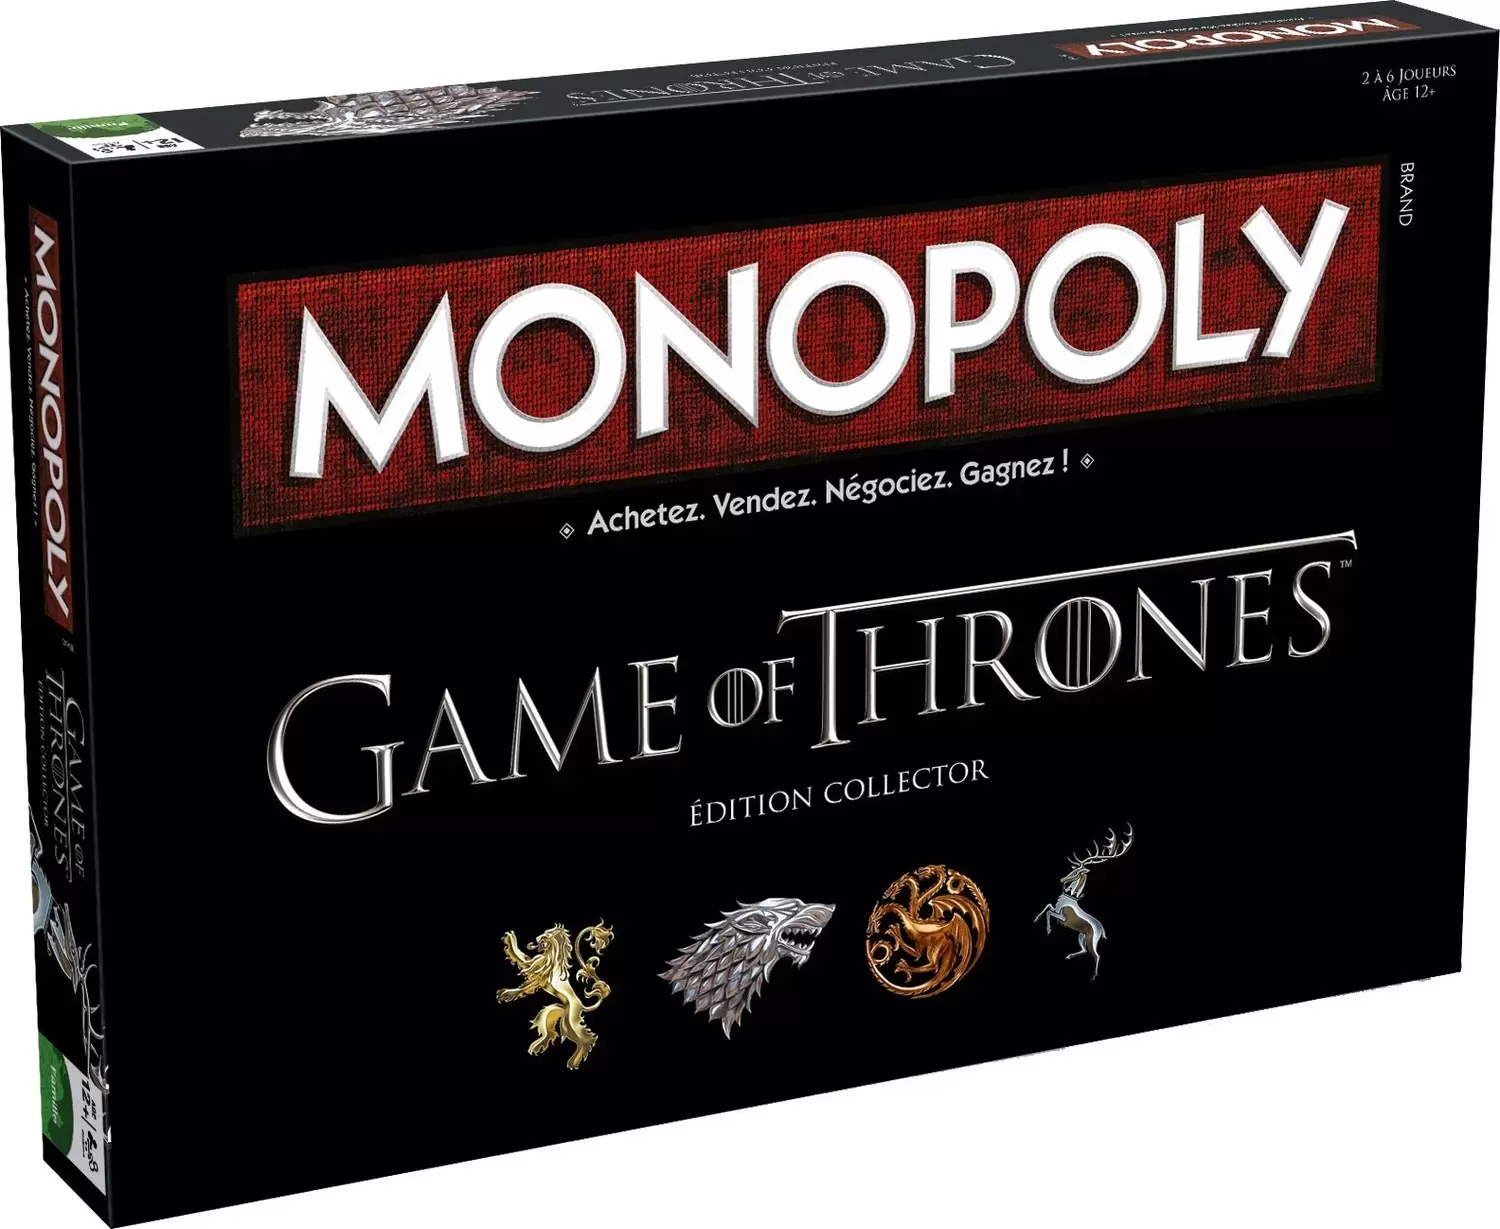 Monopoly Films & Séries TV - Monopoly Game of Thrones